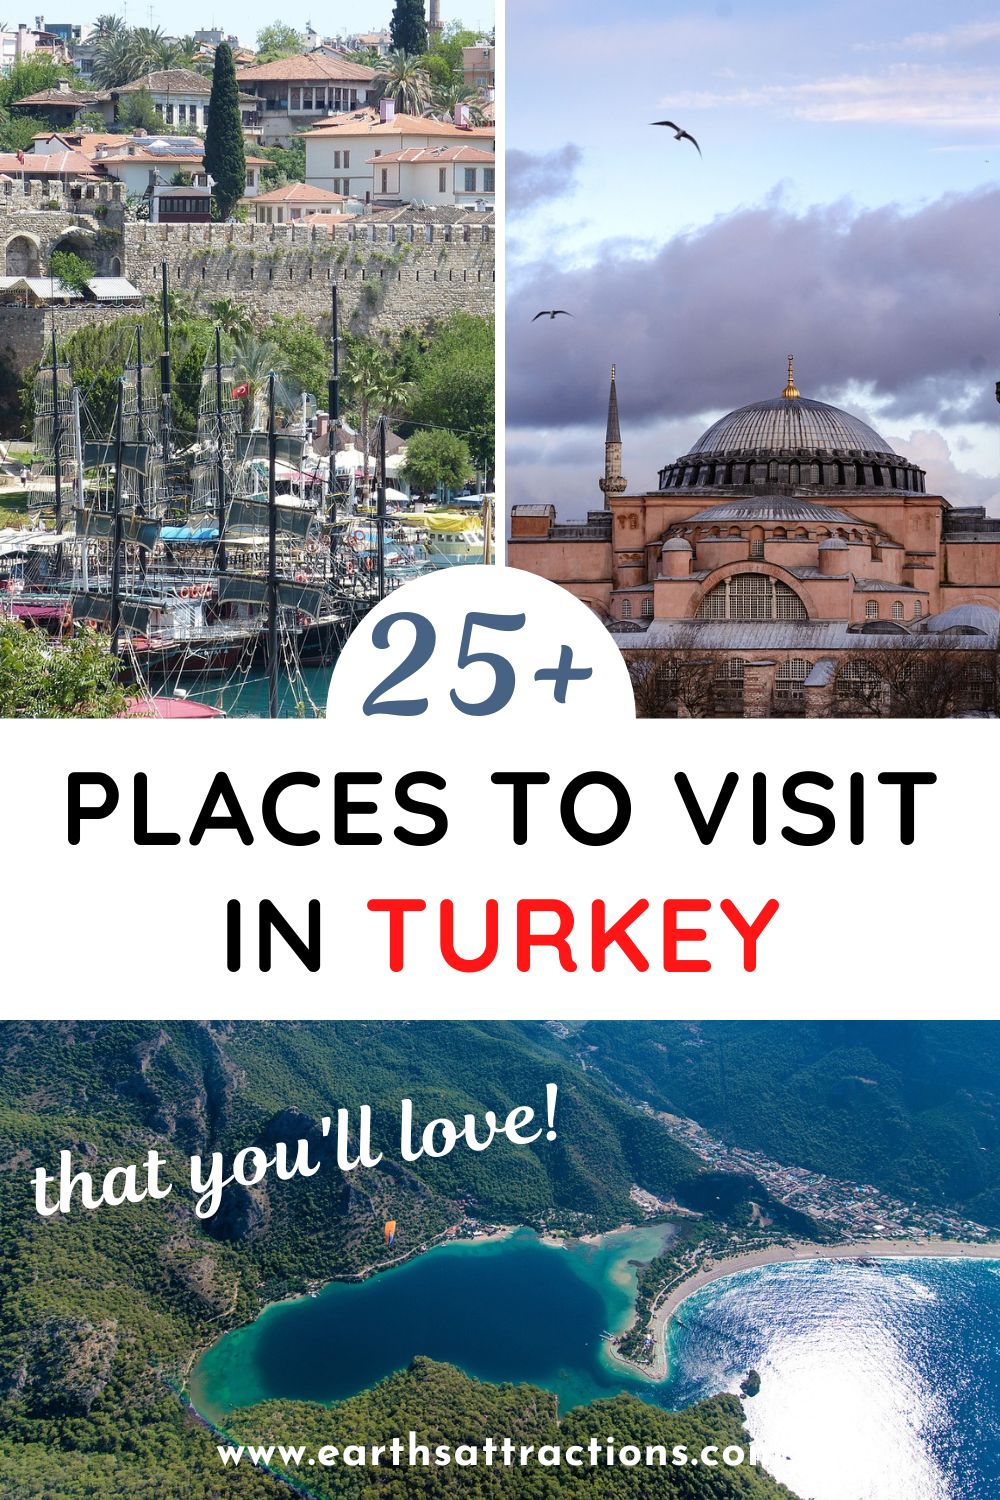 Things to do in Turkey. Discover the top attractions in Turkey and the best places to visit in Turkey - as well as hidden gems in Turkey from this Ultimate Guide to the Best Places to Visit in Turkey #turkey #turkeyattractions #turkeythingstodo #turkeyplacestovisit #asia #europe